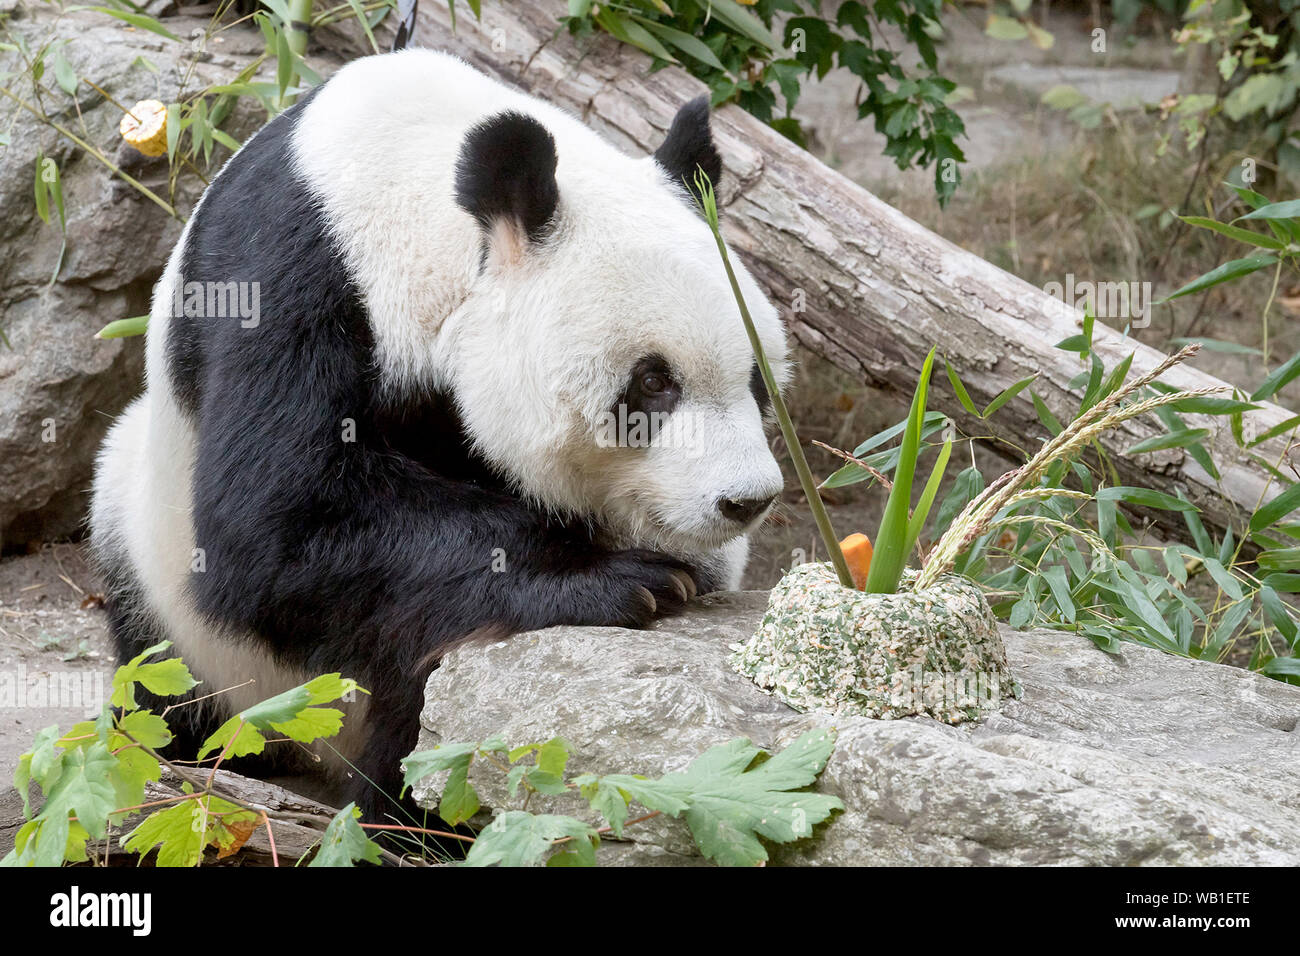 Vienna, Austria. 21st Aug, 2019. Giant Panda Yuan Yuan prepares to eat his birthday meal in the Schonbrunn Zoo in Vienna, Austria, Aug. 21, 2019. The giant panda Yuan Yuan based at the Schonbrunn Zoo in Vienna, Austria, is set to turn 20 years old on Friday with celebrations having already begun, according to the zoo. Credit: Daniel Zupanc/Xinhua Stock Photo